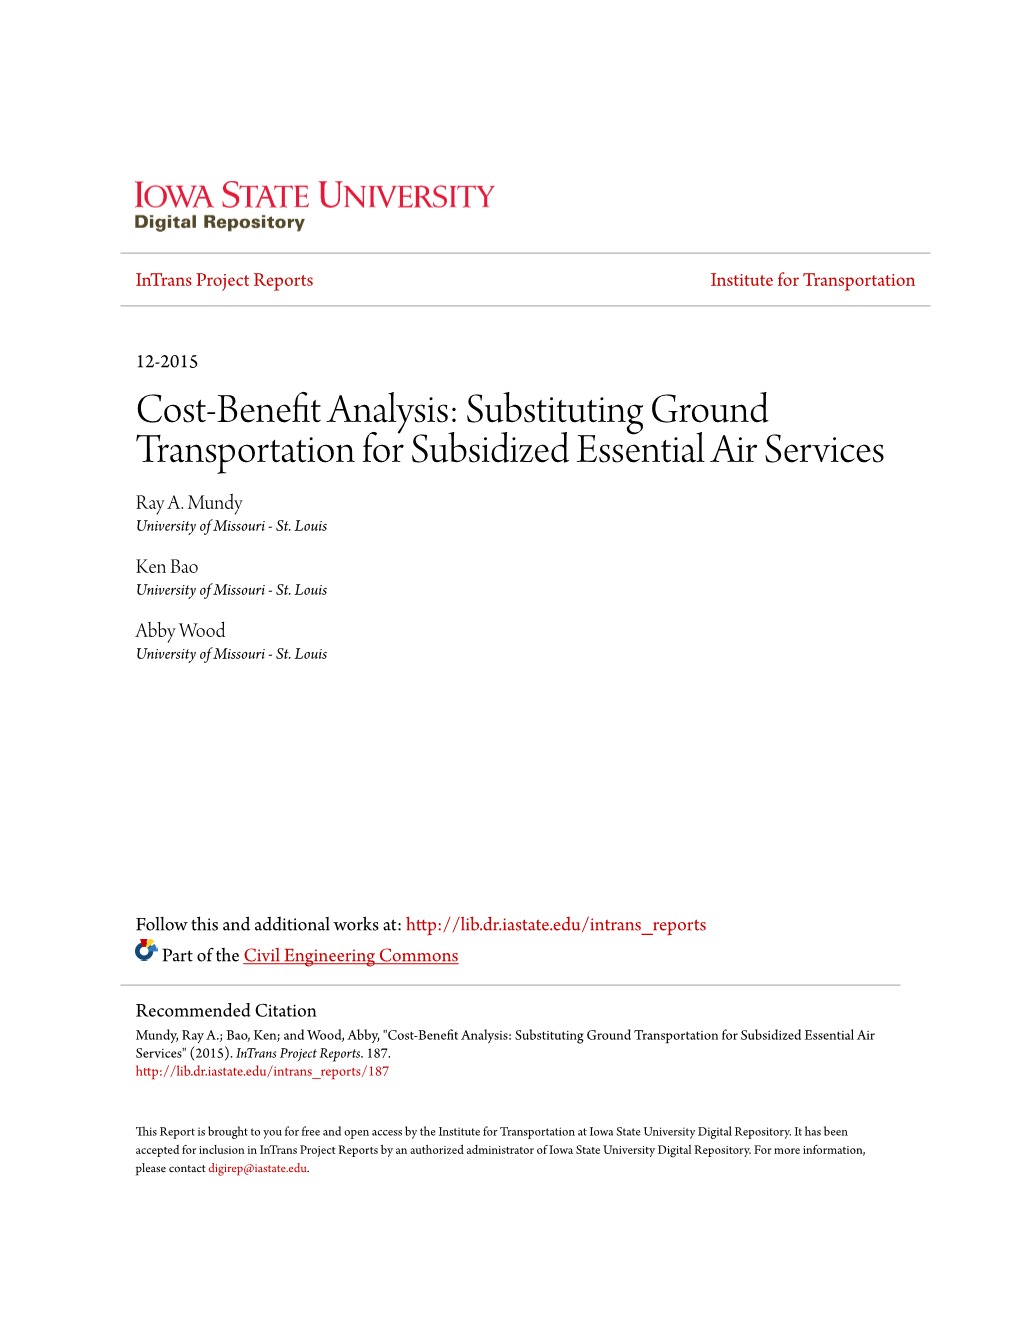 Cost-Benefit Analysis: Substituting Ground Transportation for Subsidized Essential Air Services Ray A